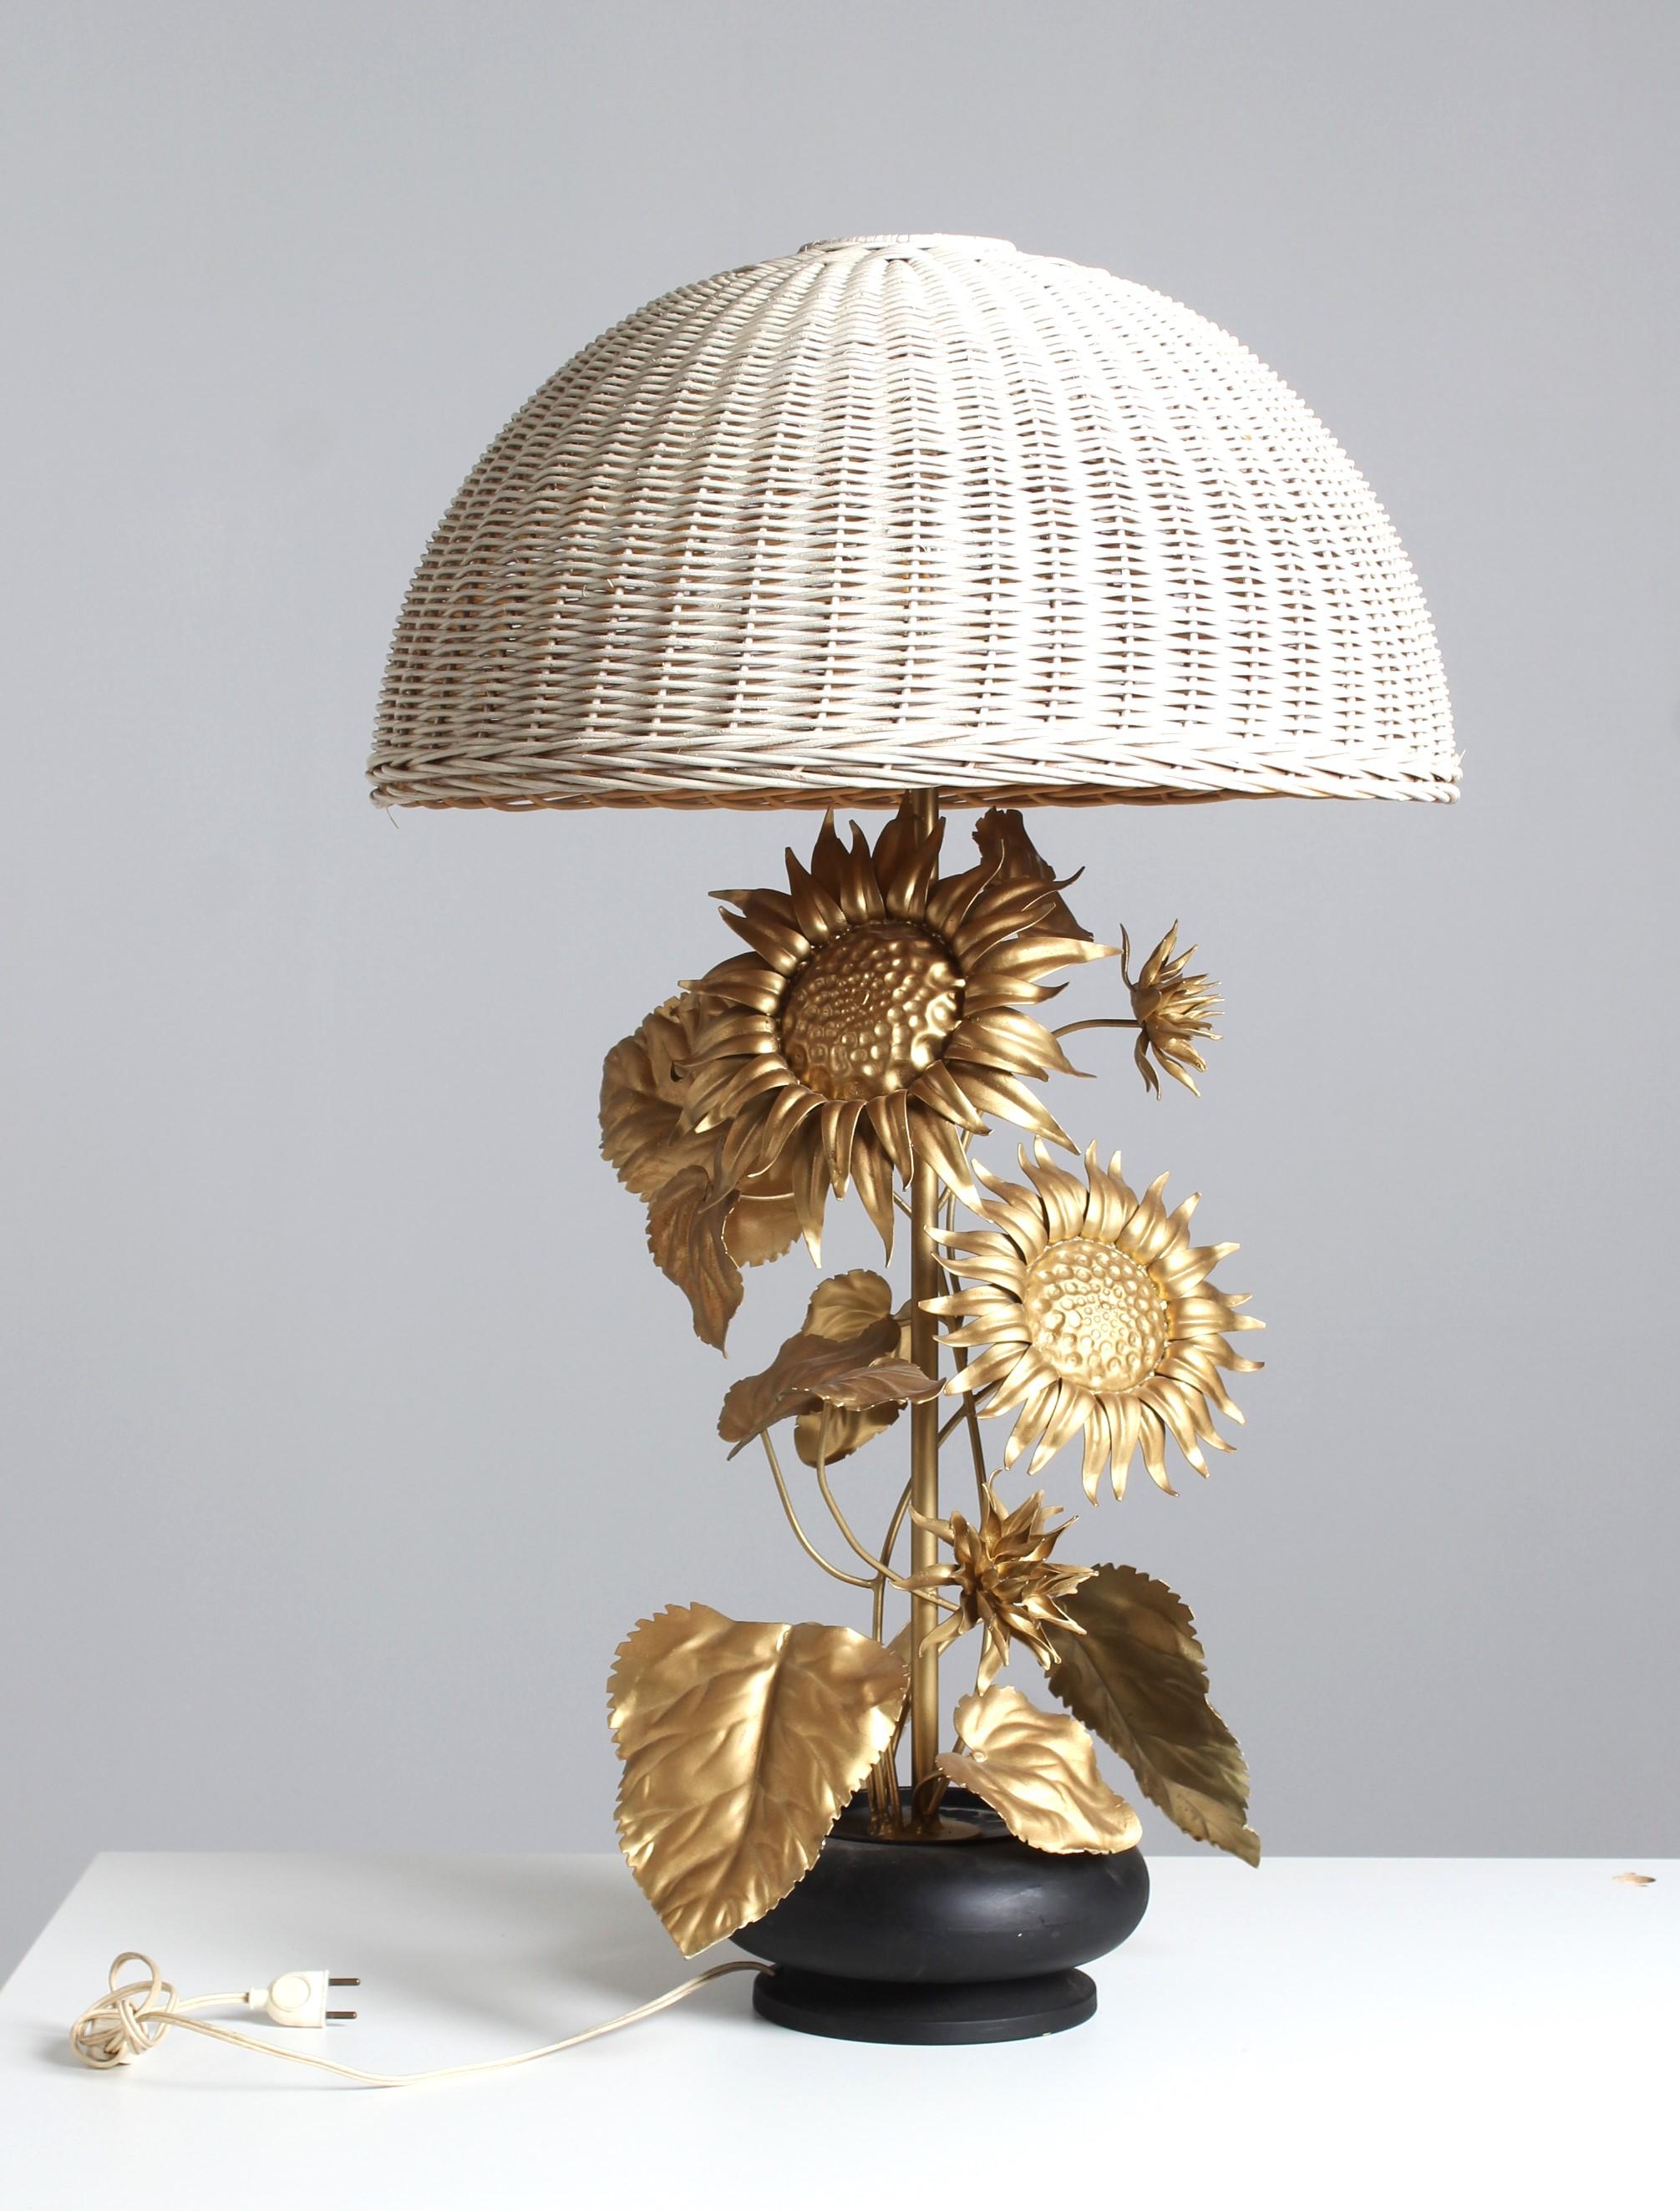 Large sunflower table lamp made of gold-painted metal with detailed flowers and leaves.
The plant rises out of a flower pot and is topped by a rattan shade.

Height 95 cm
Diameter of the lampshade: 57 cm

The electrification is in perfect condition